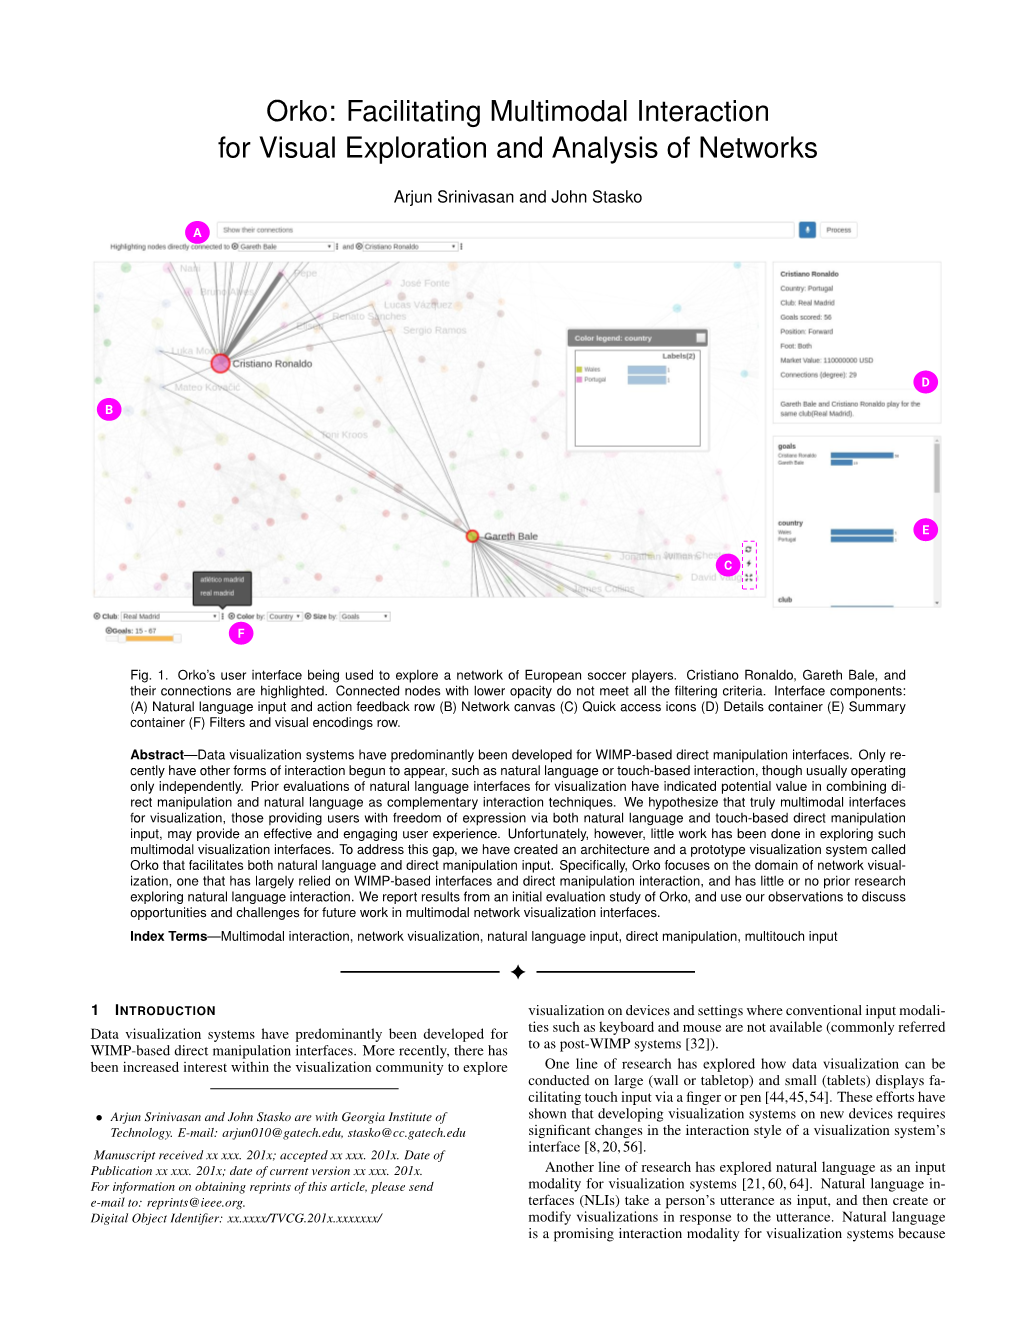 Facilitating Multimodal Interaction for Visual Exploration and Analysis of Networks